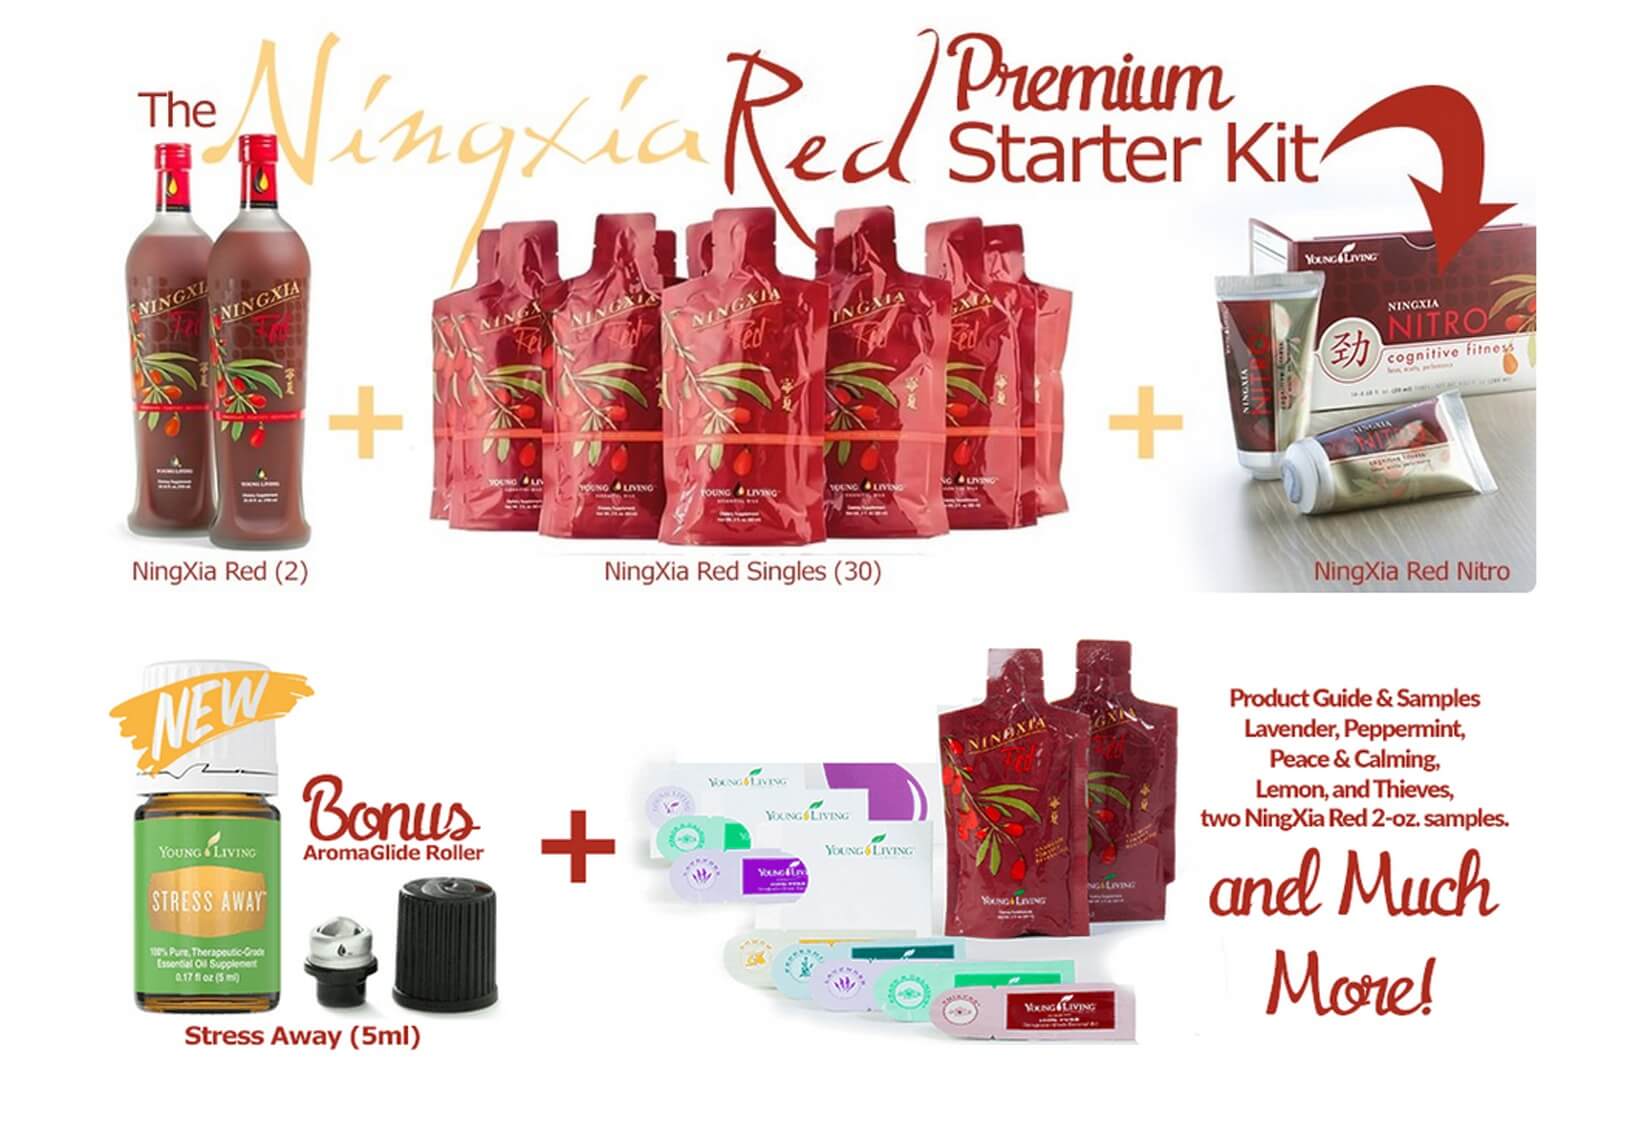 Young Living's NingXia Red Premium Starter Kit